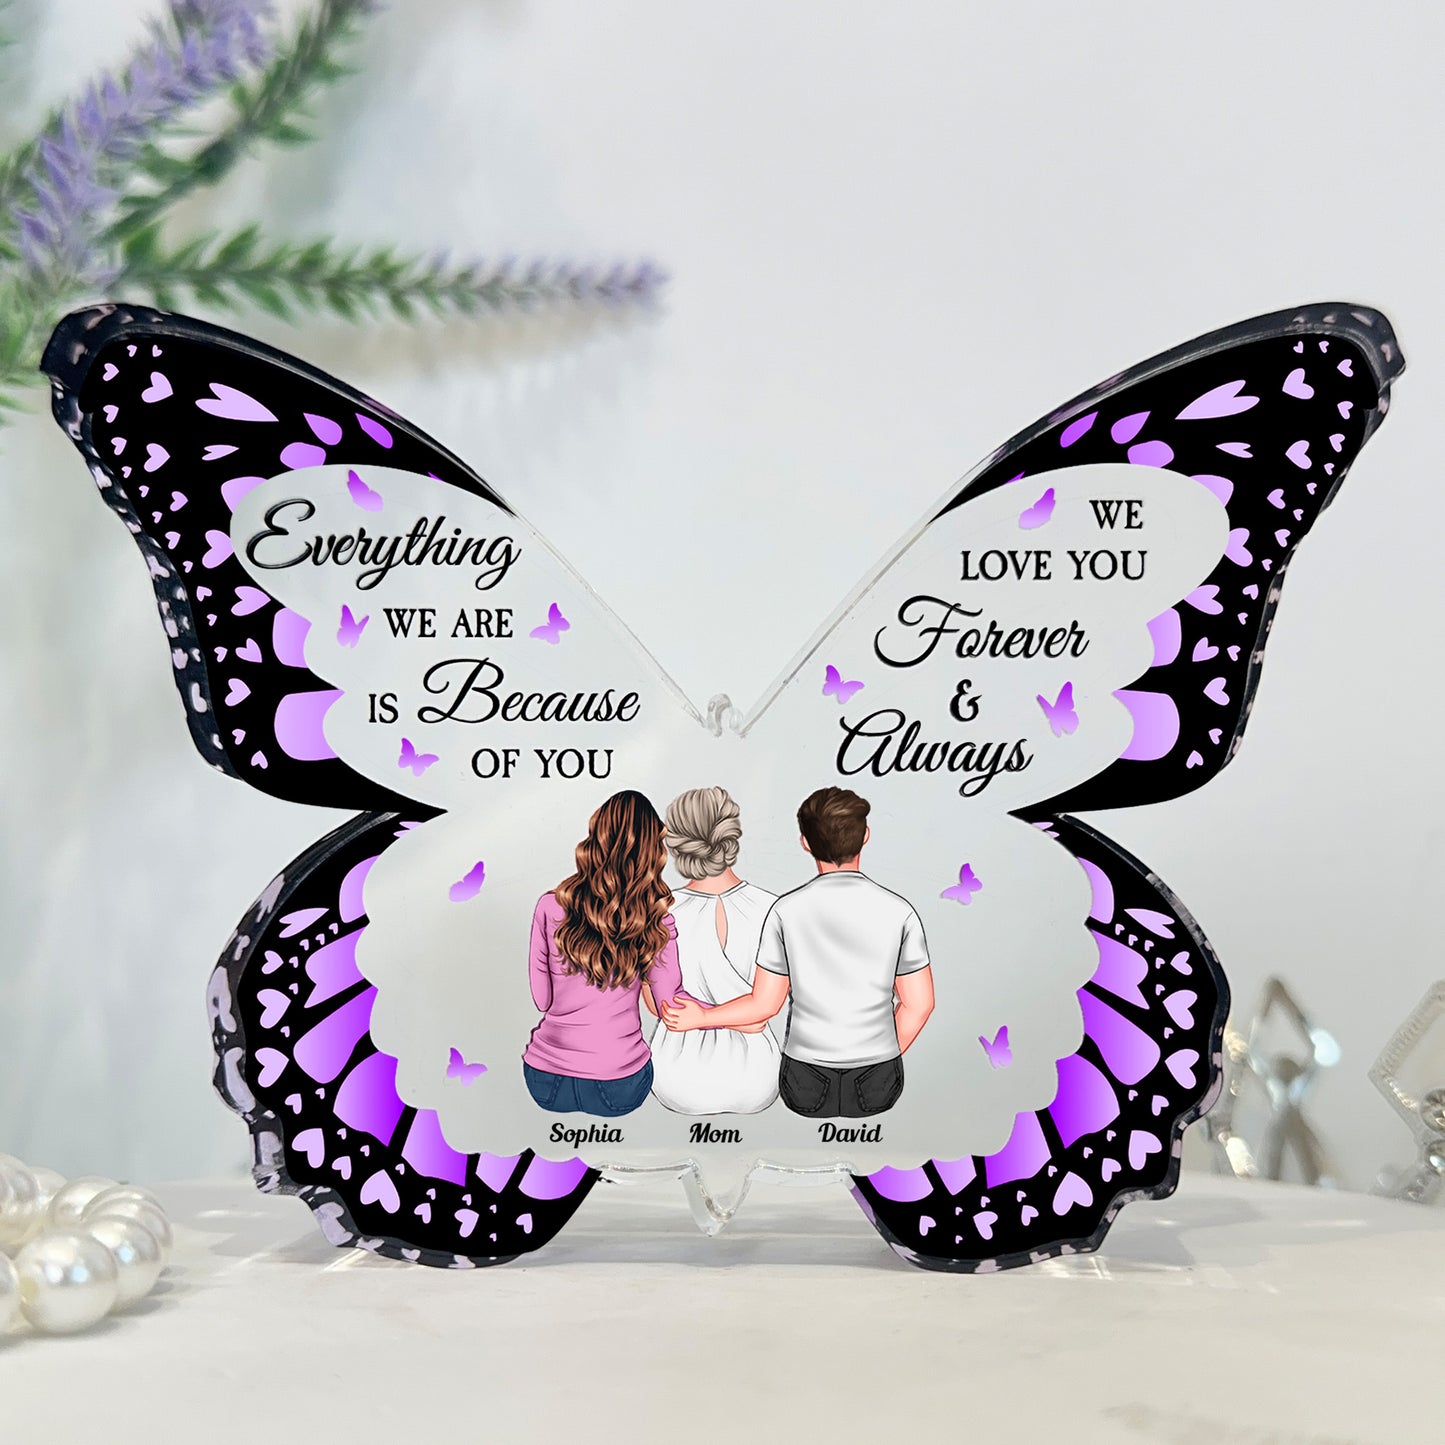 We Love You Forever & Always - Personalized Acrylic Plaque